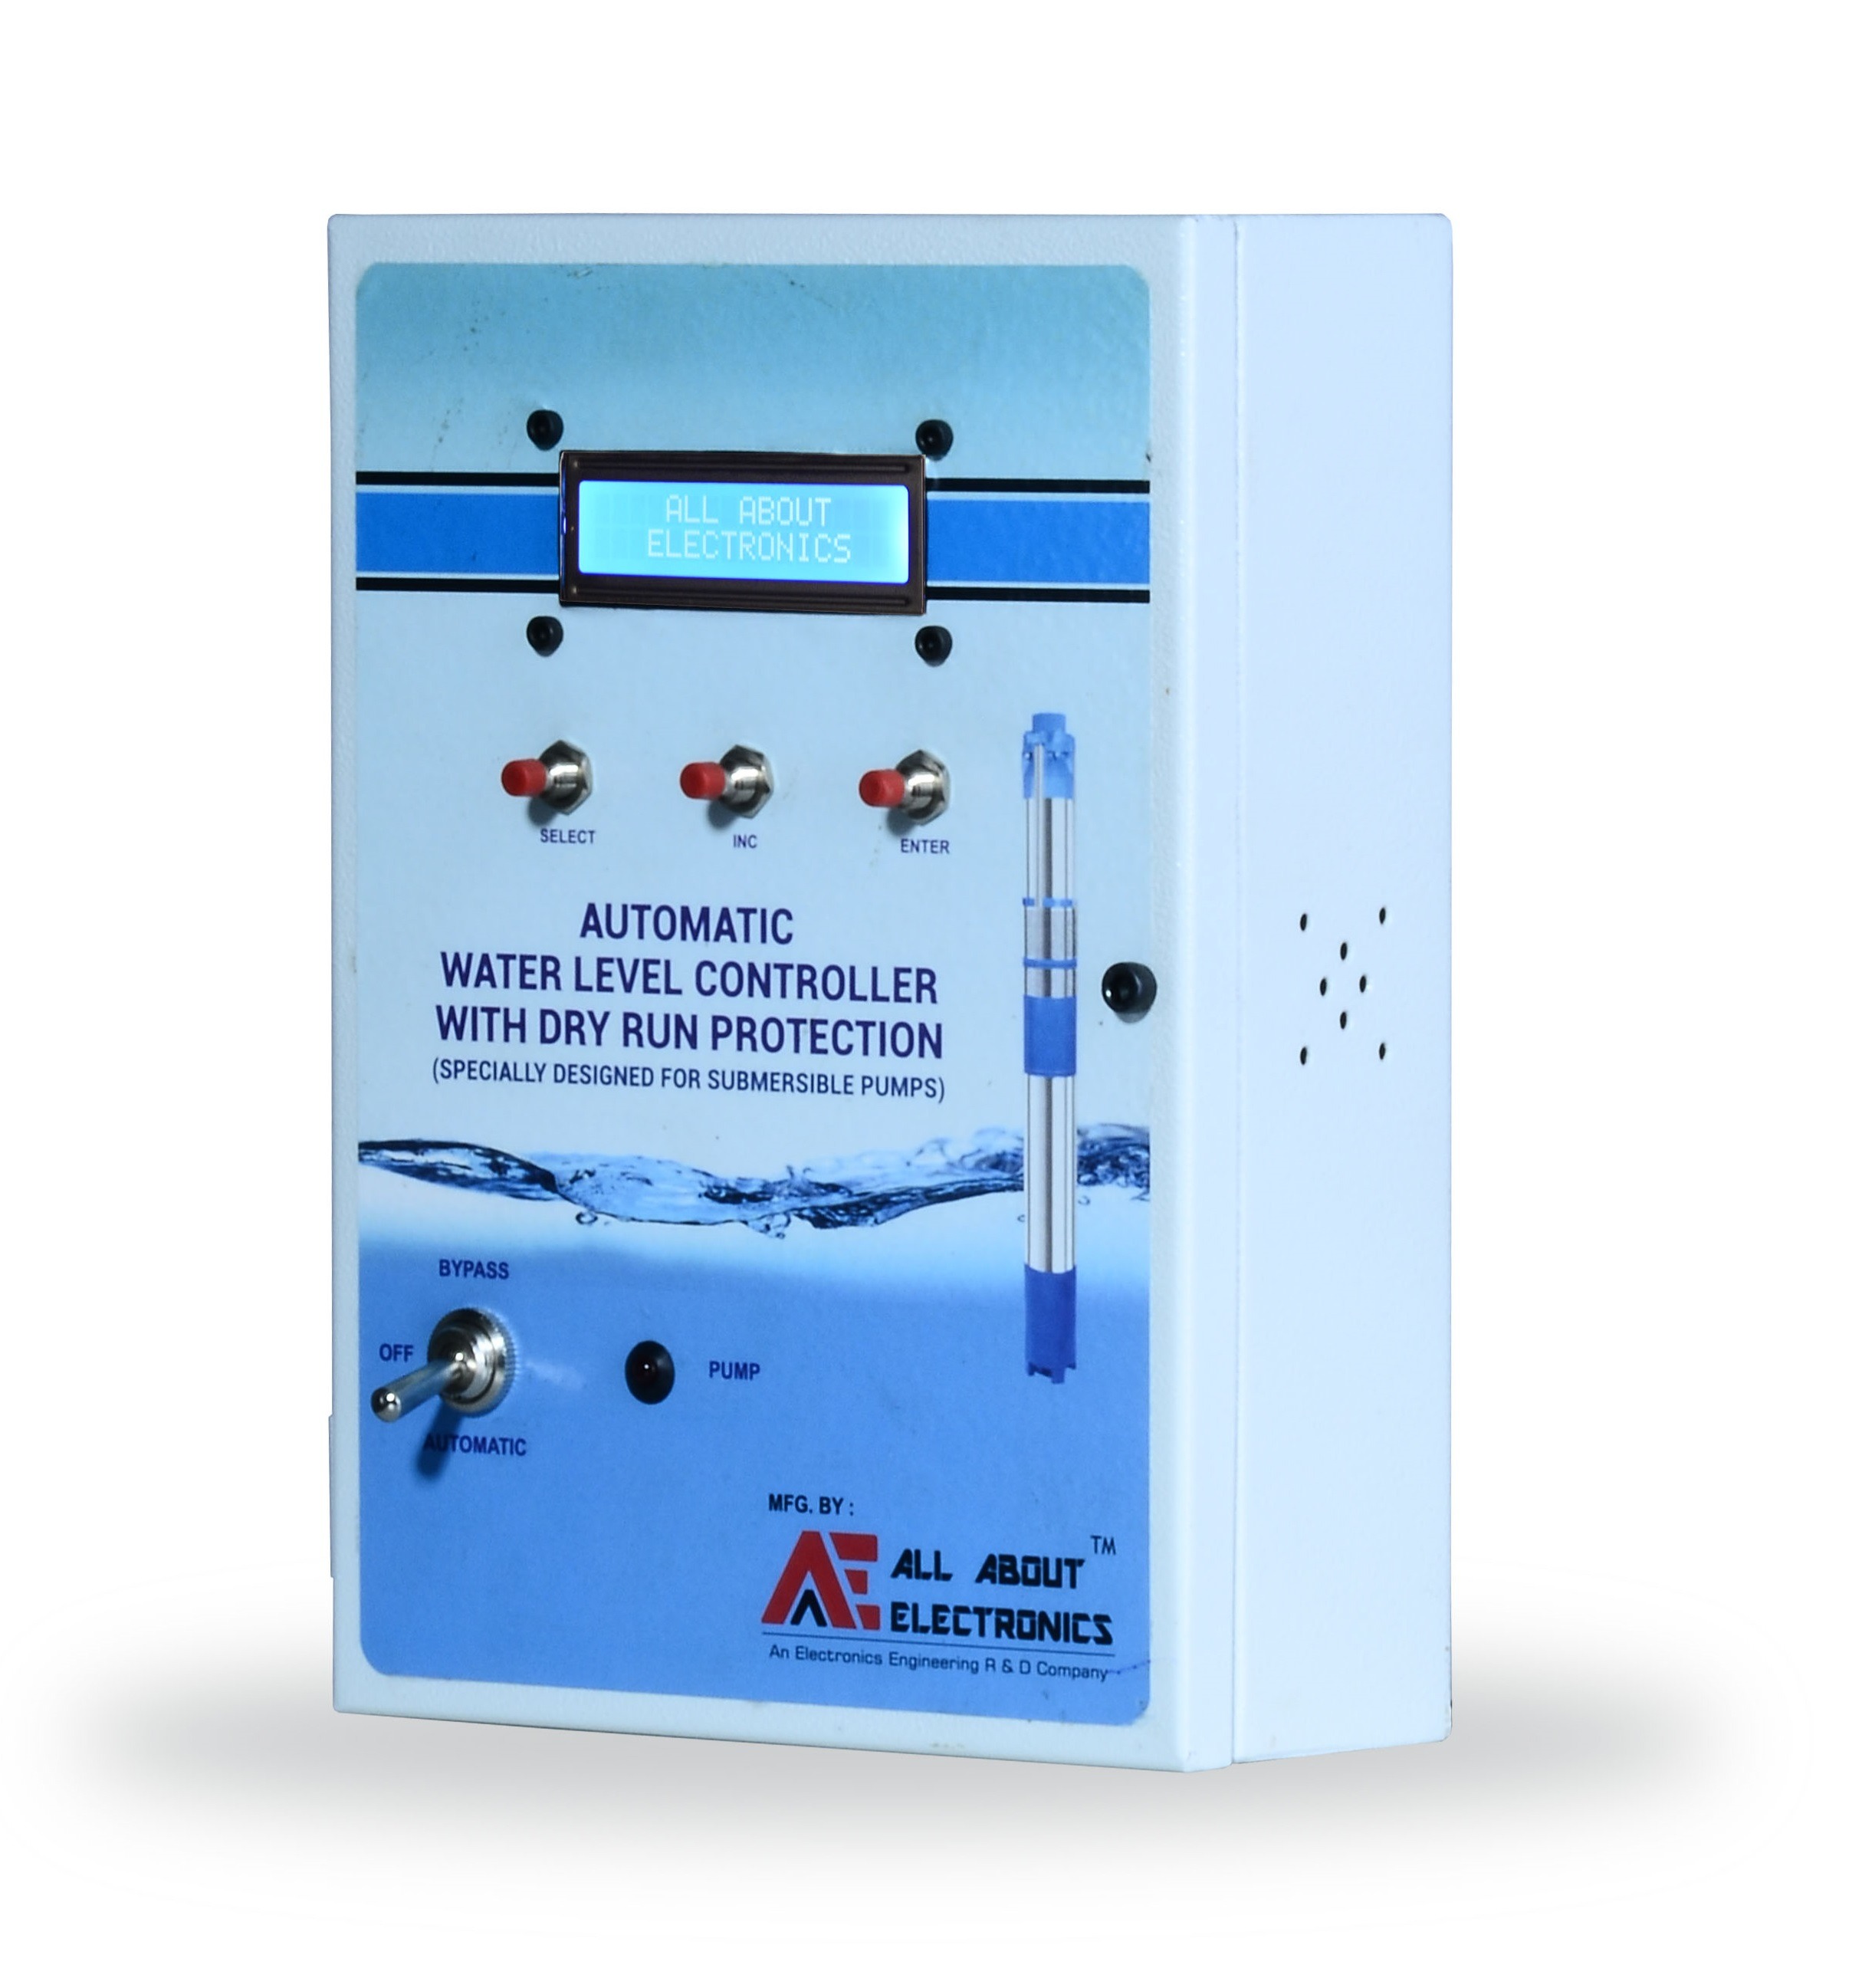 DRWLC-03 3-Phase Automatic Water Level Controller With Dry Run Protection